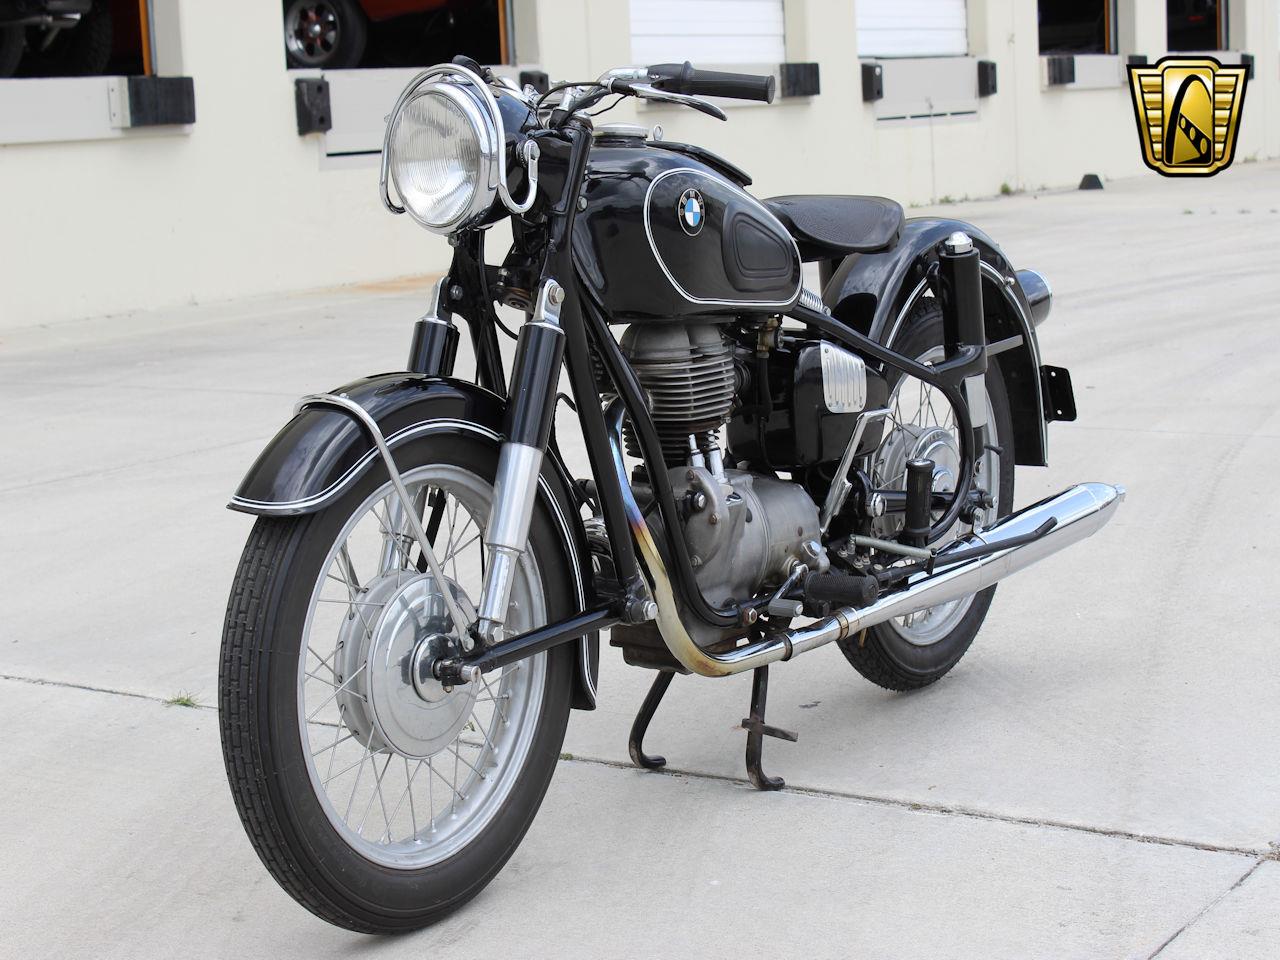 Classic Vintage Bmw Motorcycles For Sale / 1973 Bmw R60/5 Classic BMW